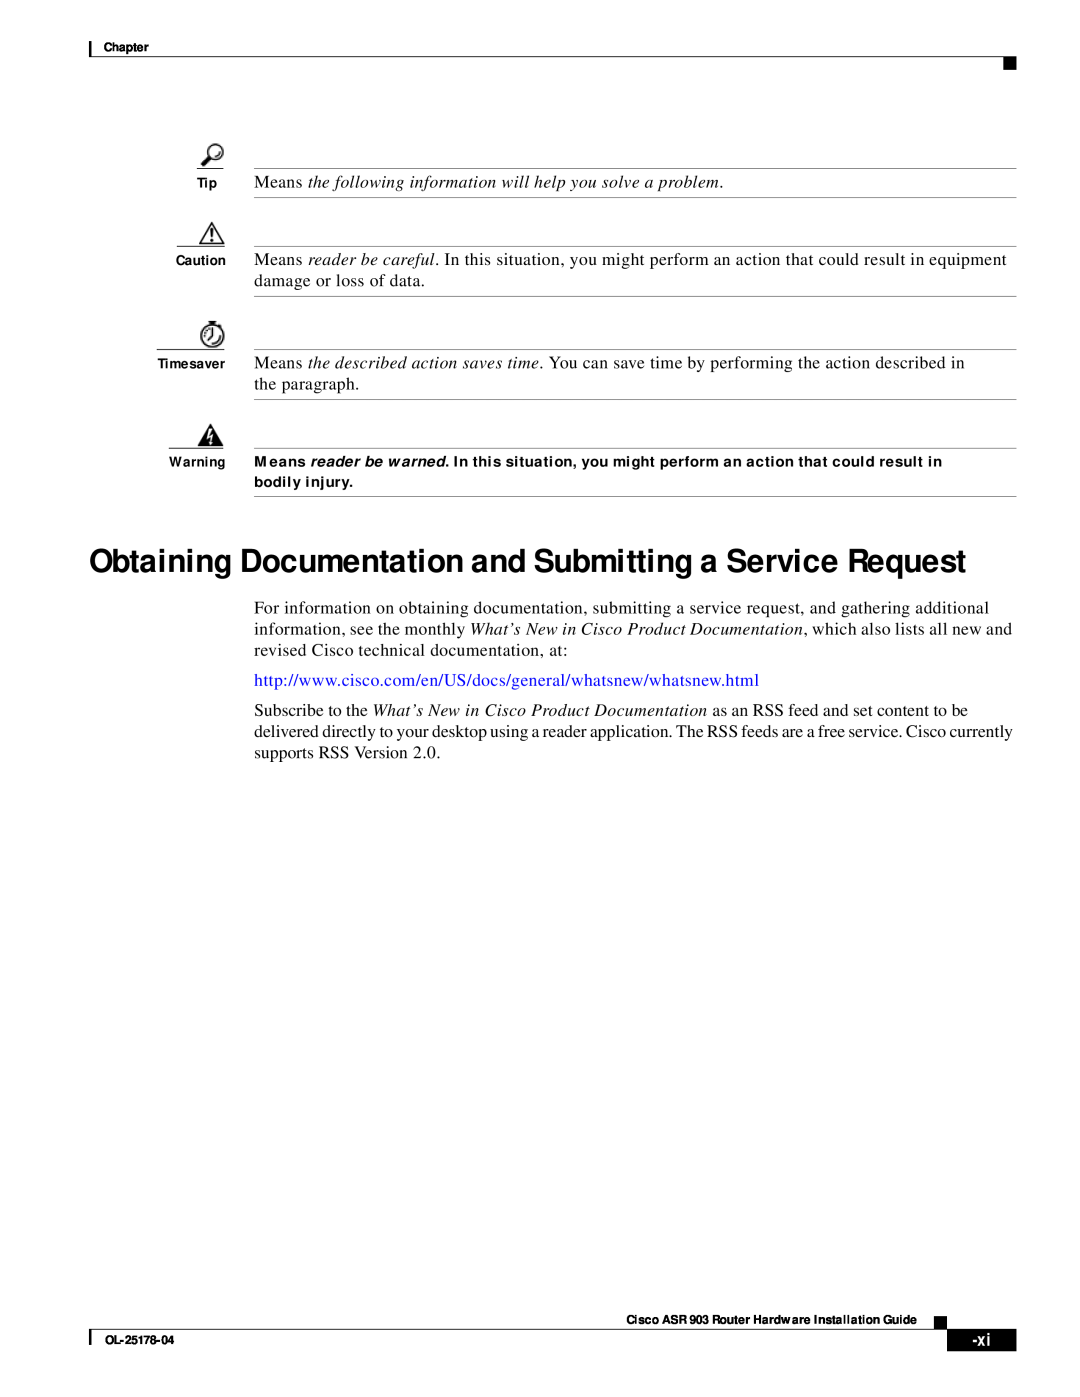 Cisco Systems ASR 903 manual Obtaining Documentation and Submitting a Service Request 